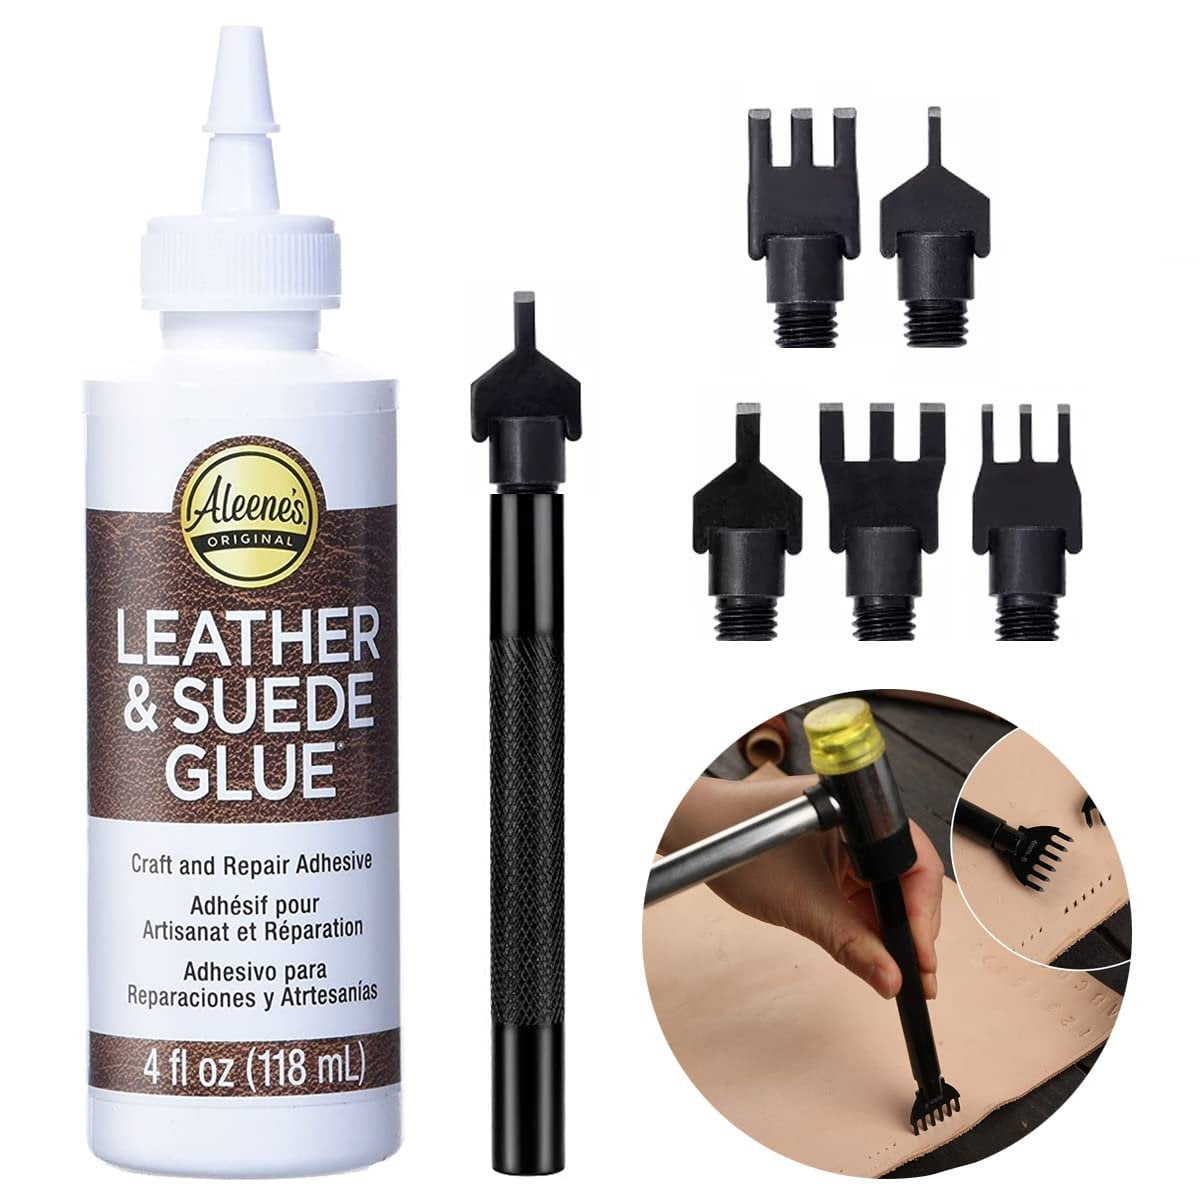 Best Fabric Glue For Patches : Reviews and Buying Guide